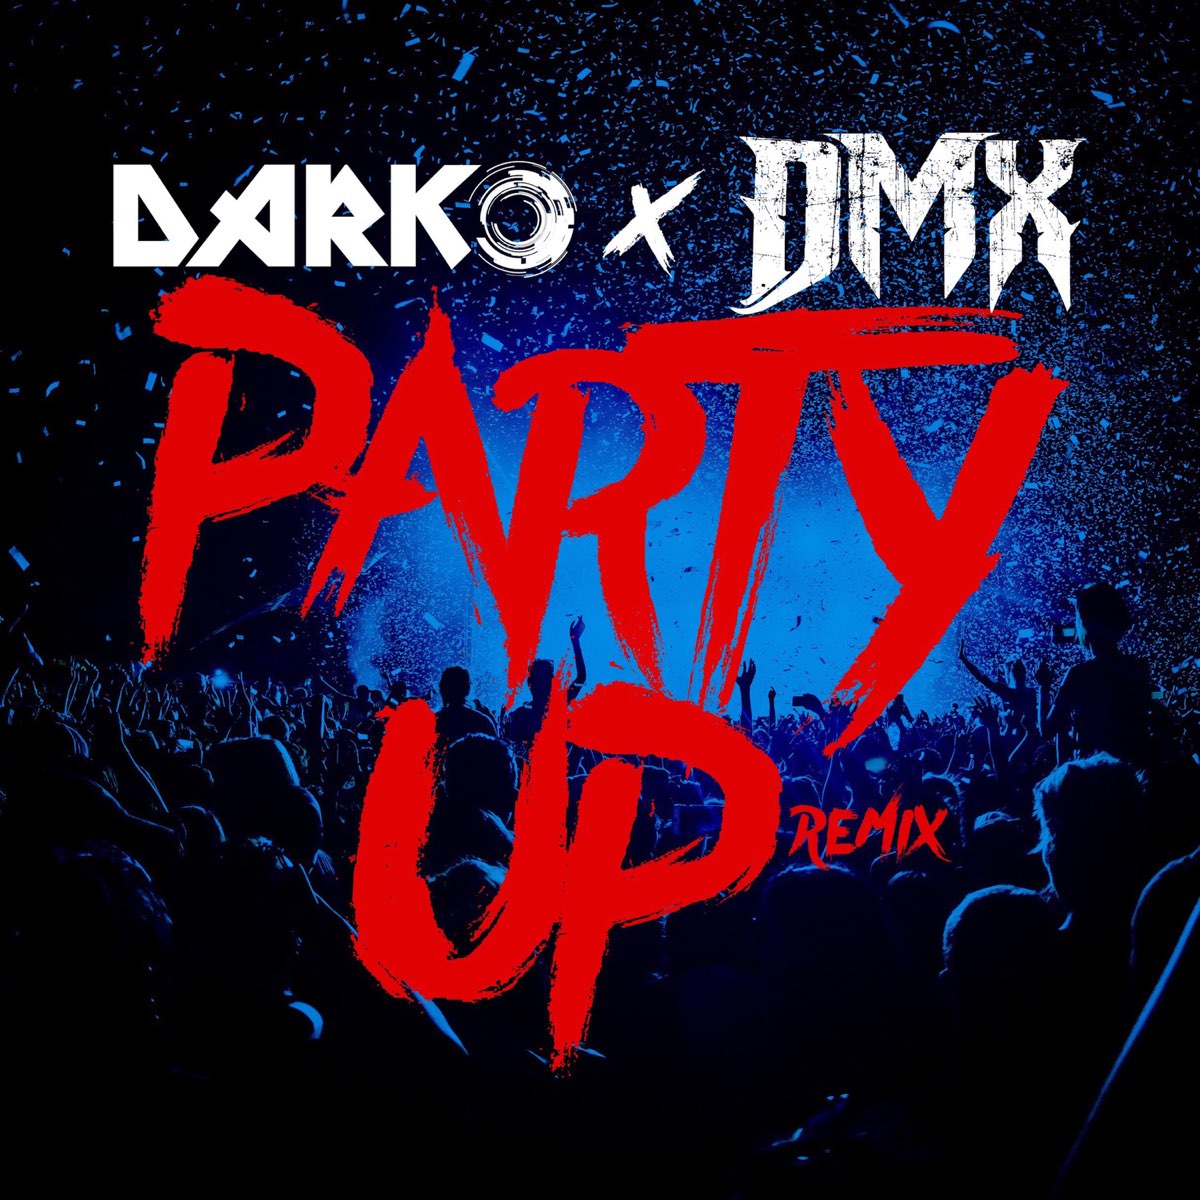 DMX - Party up (up in here). Party up. ДМХ парти ап. Party up (up in here) (Darko Remix). Pat up